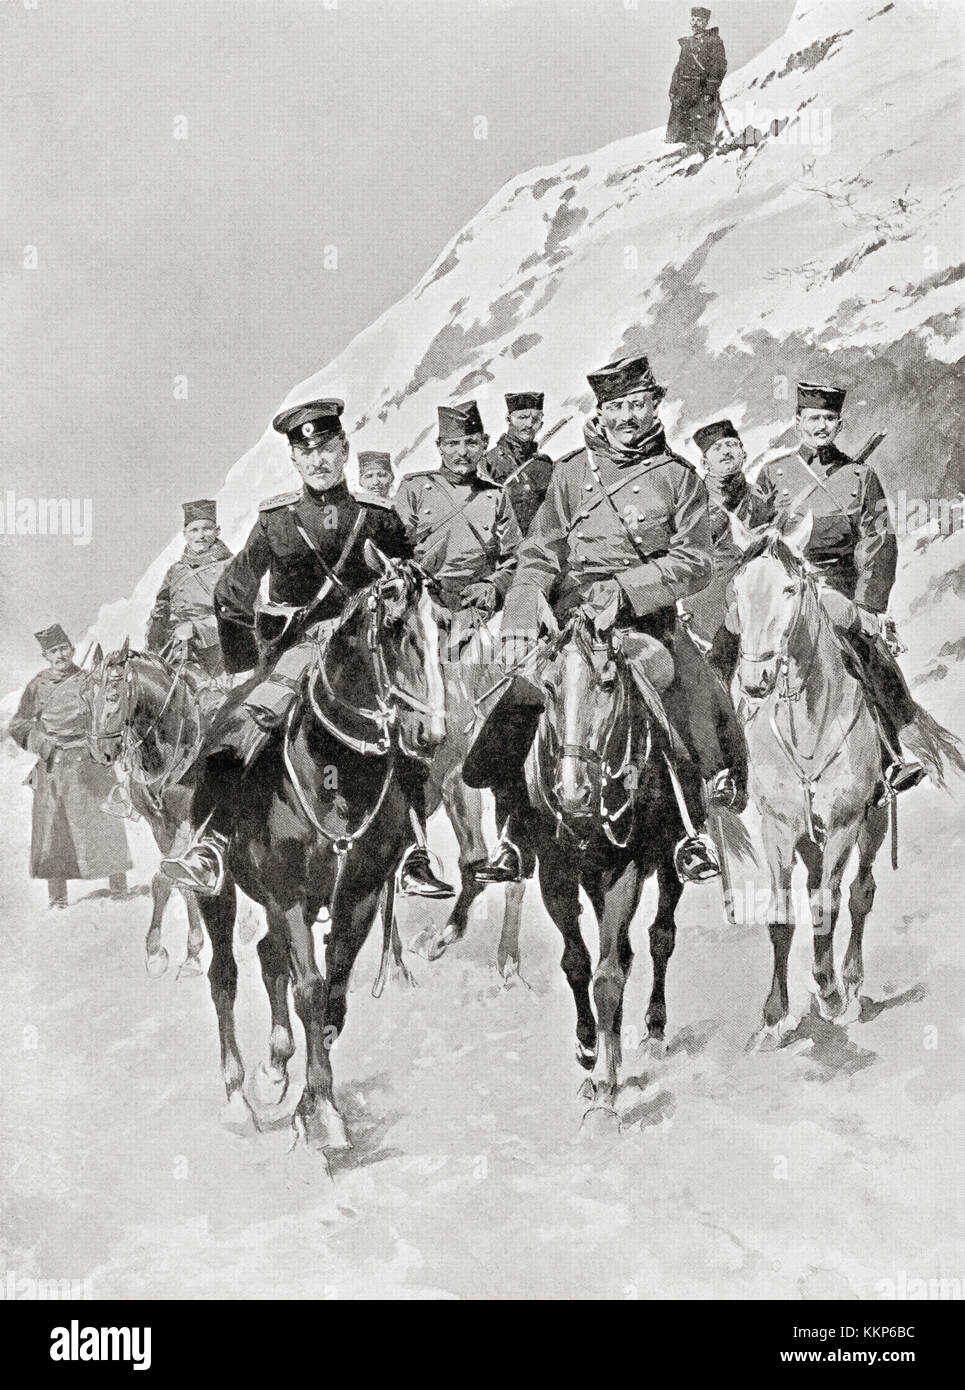 Serbian cavalry during the Balkan War of 1912-1913.  From Hutchinson's History of the Nations, published 1915. Stock Photo